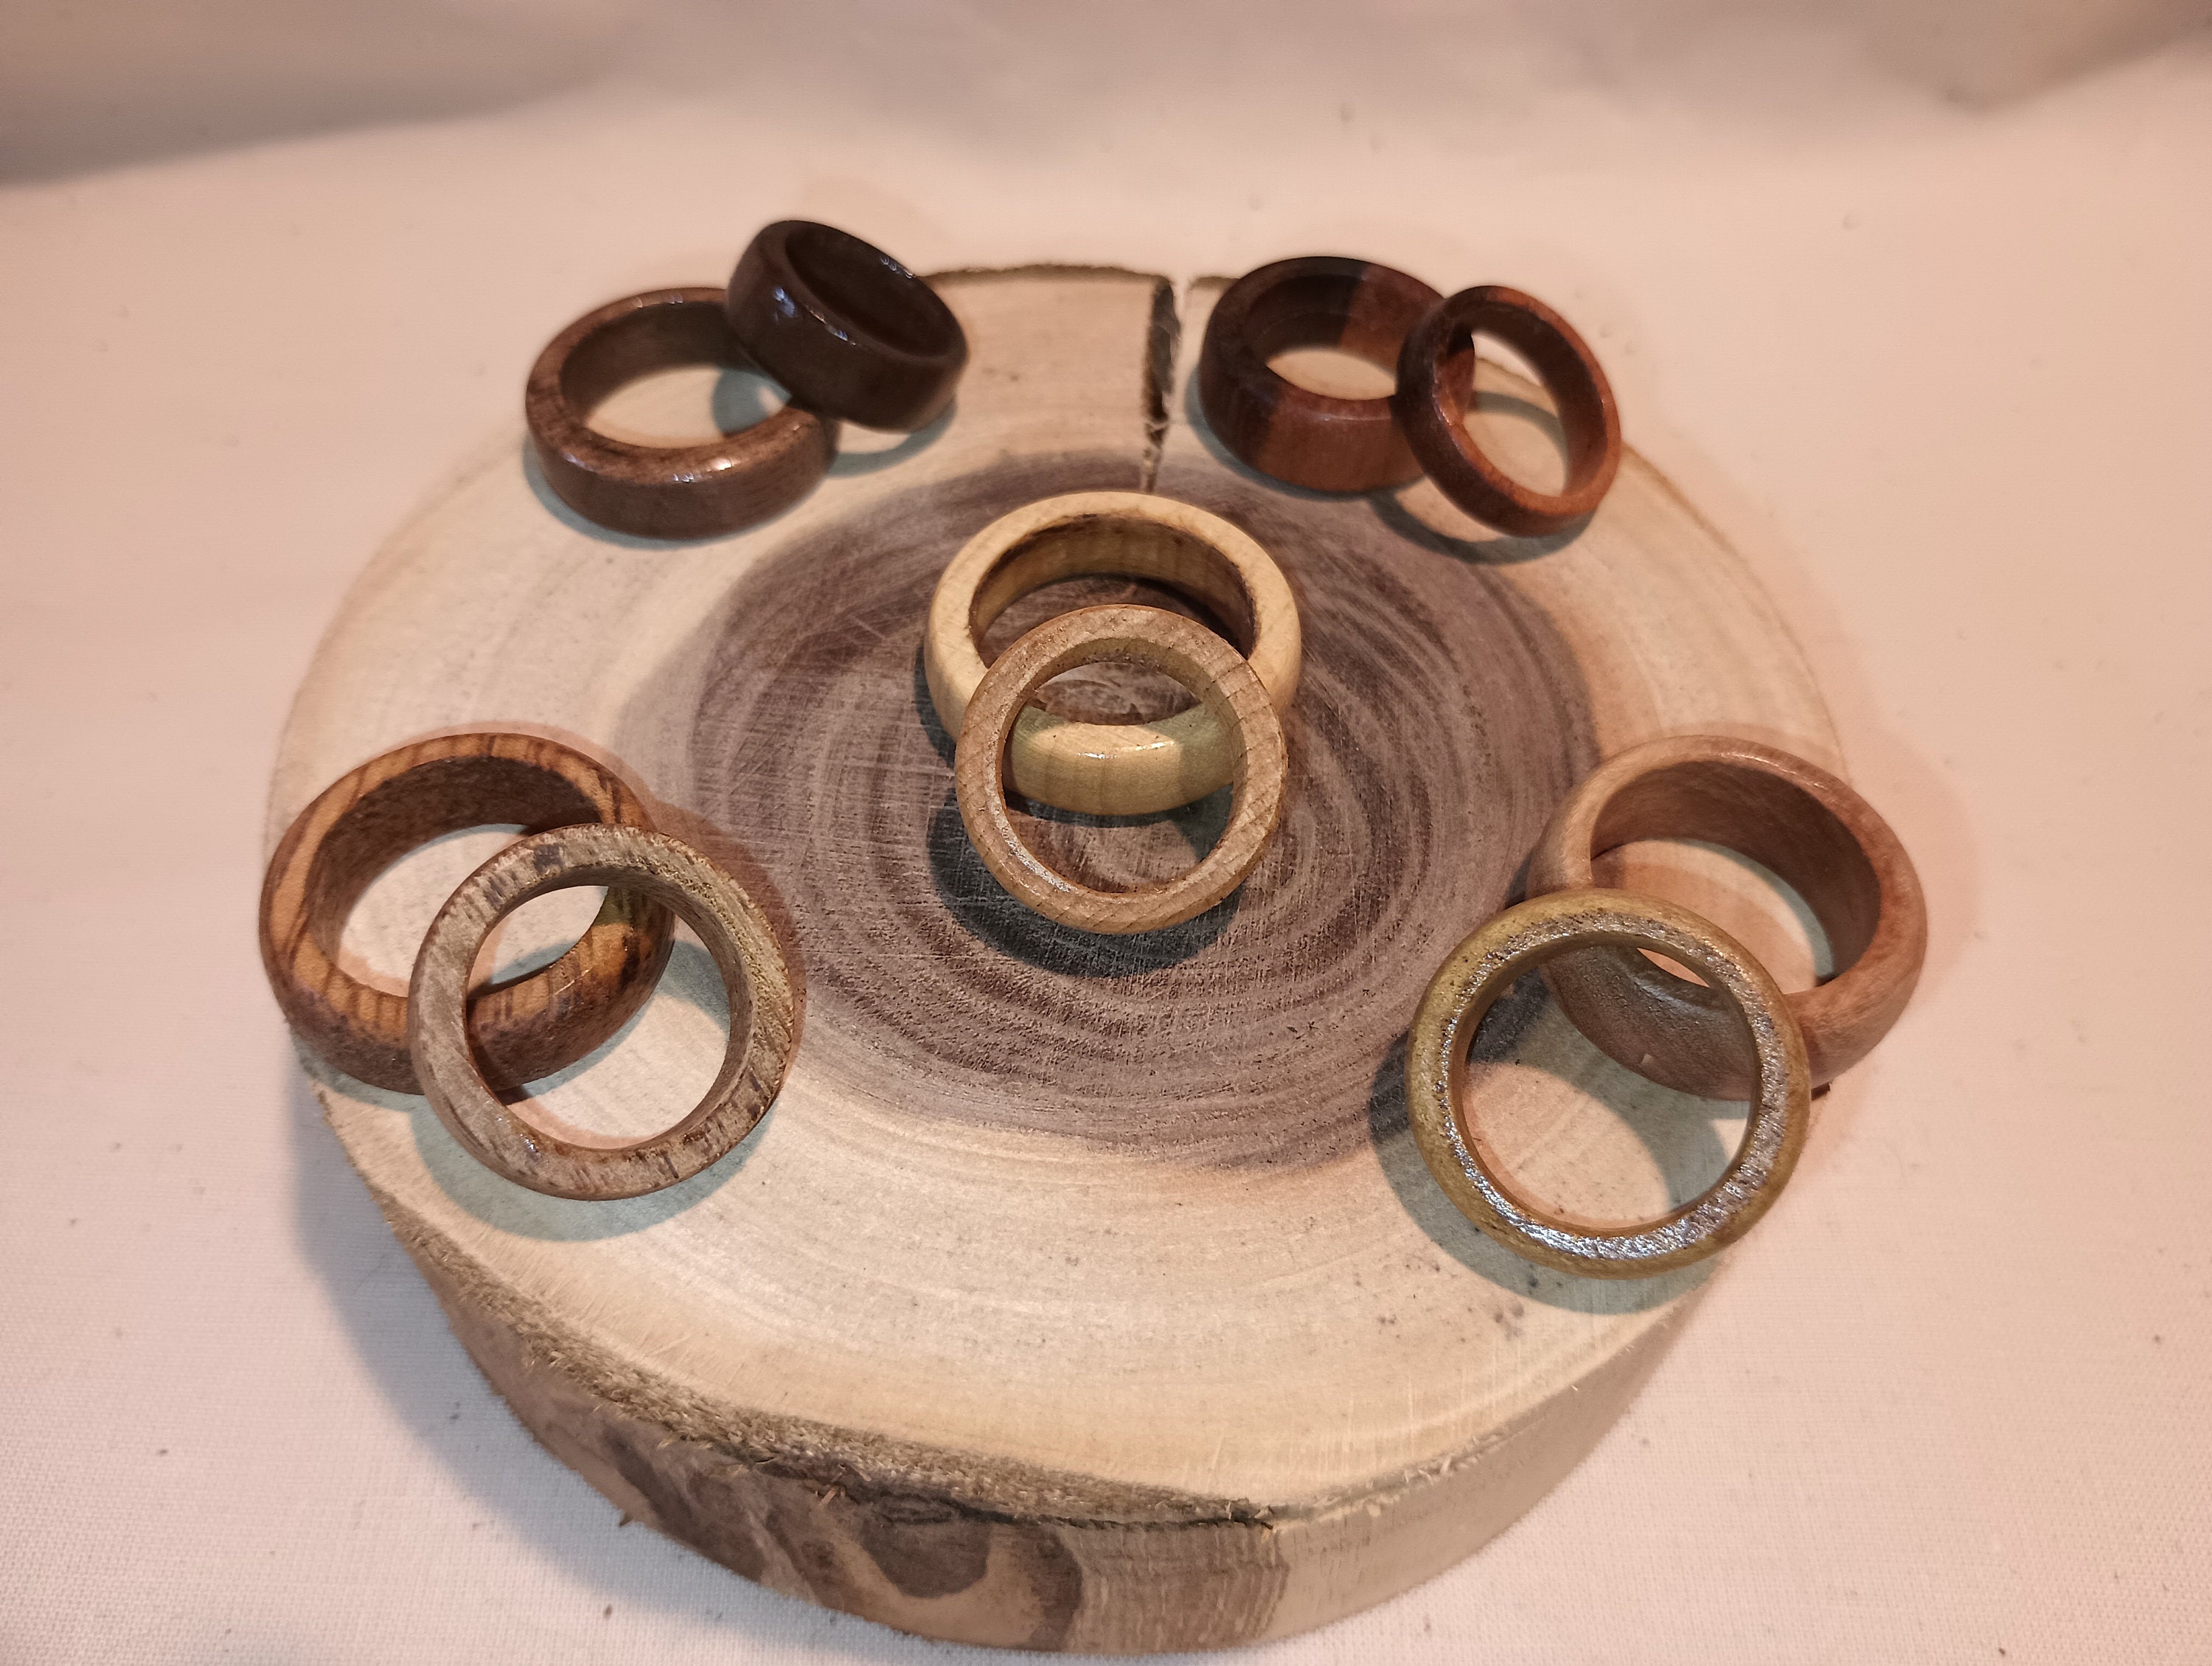 First solid wood ring that I turned on my lathe! Definitly gonna